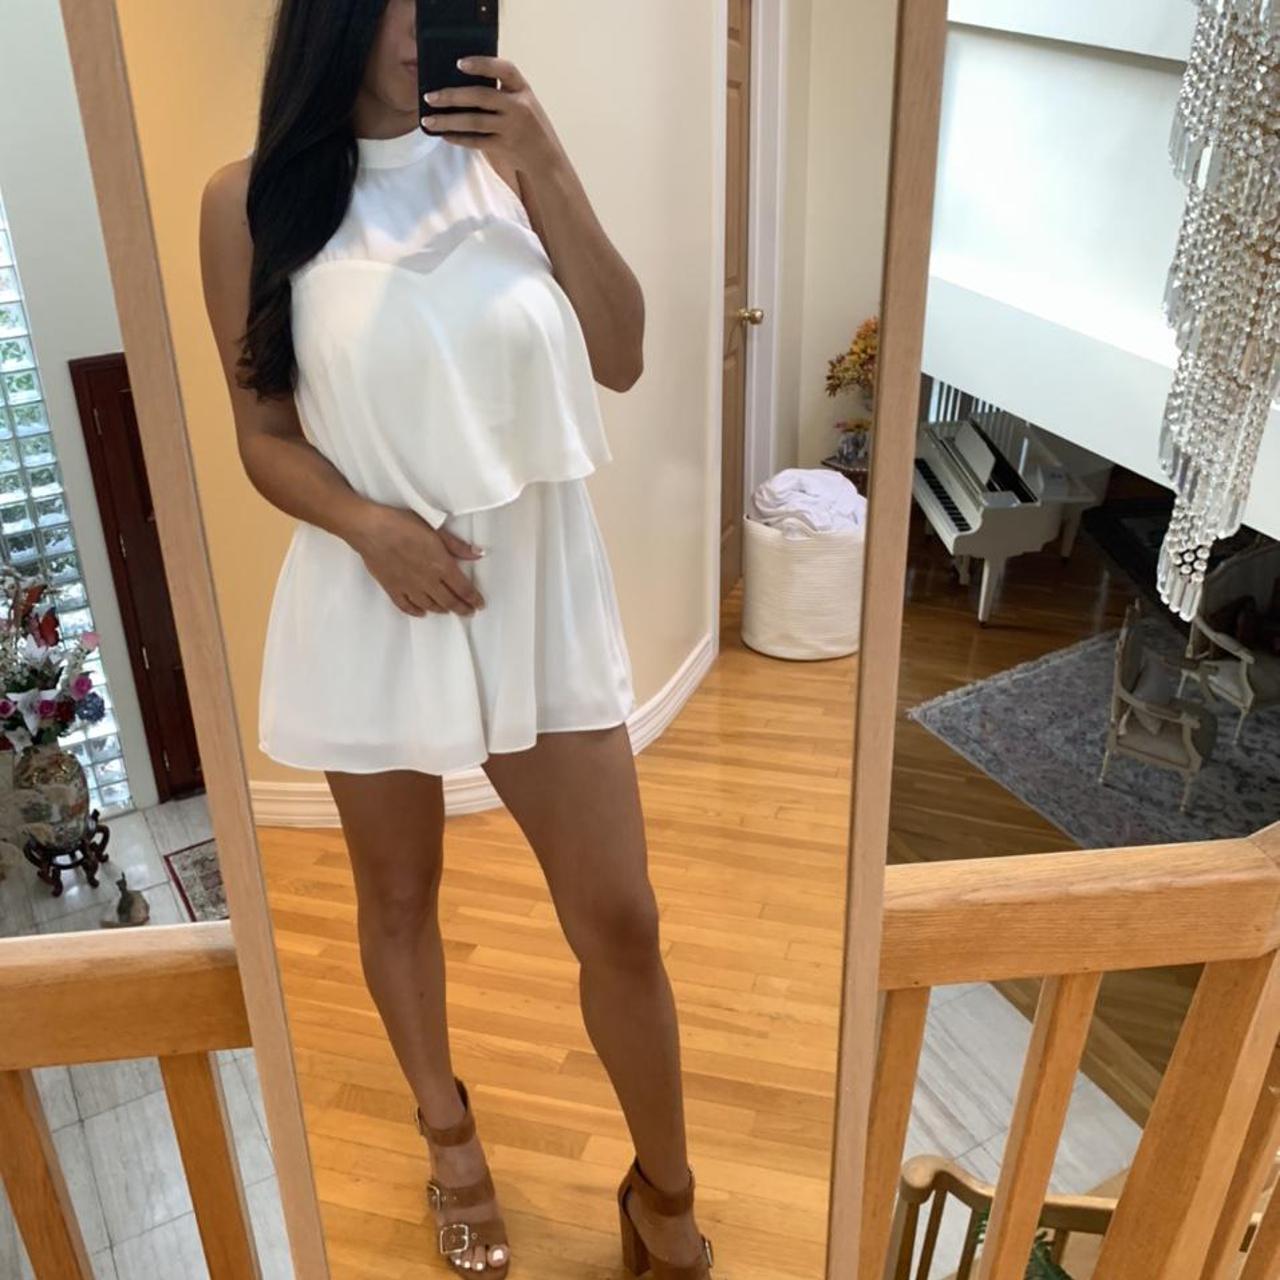 DO & BE Flowy White Romper This romper gives total... - Depop